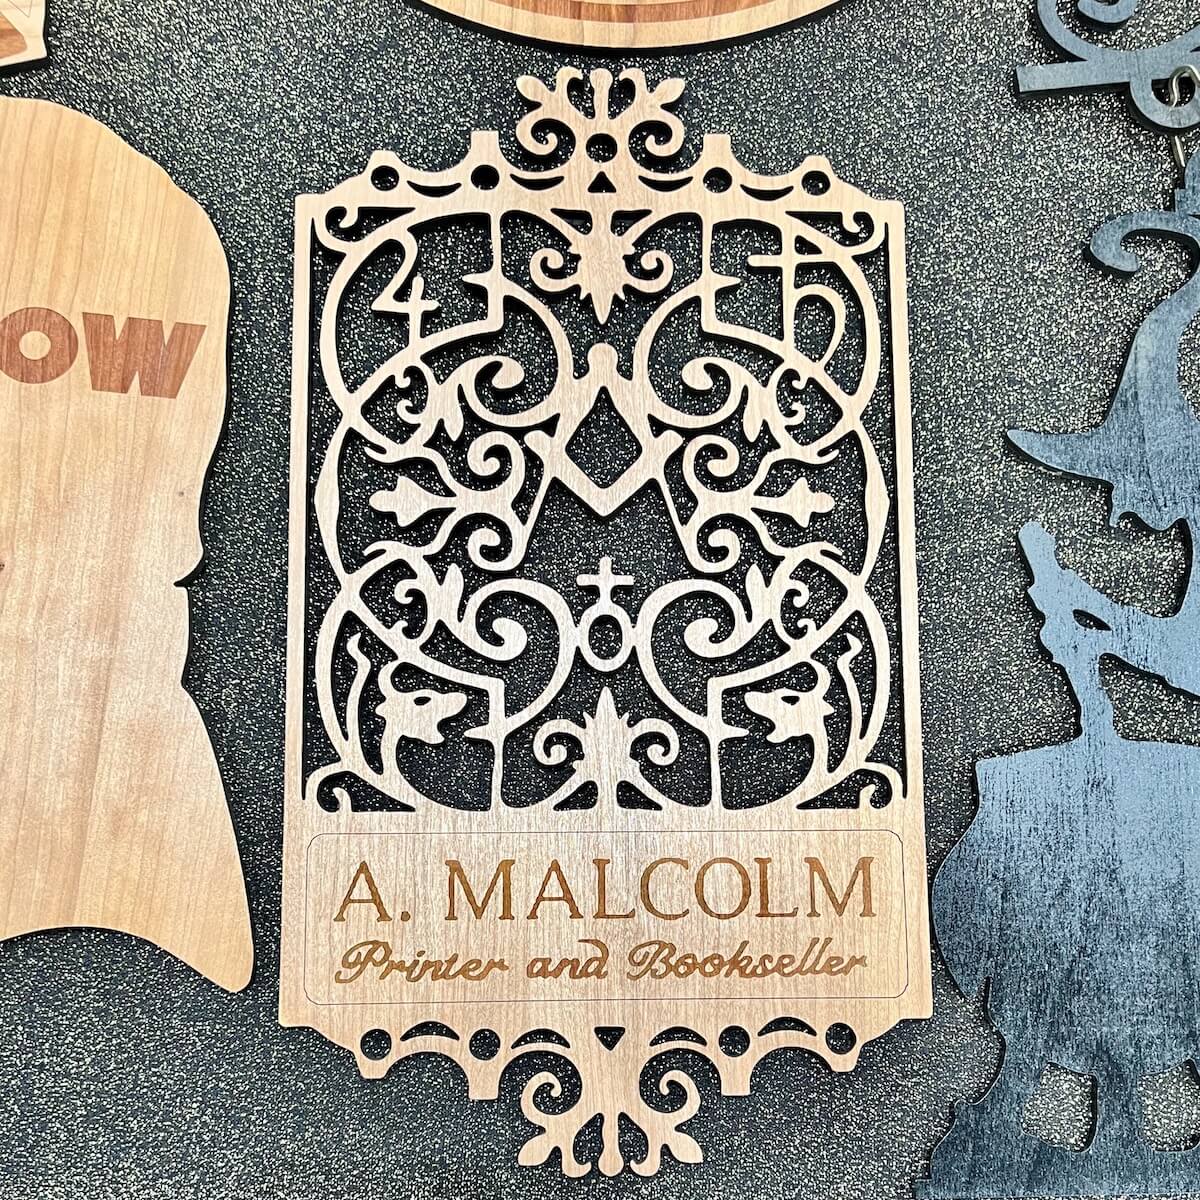 A laser cut wooden sign of the show's "A. Malcolm" printer's sign from STARZ series, Outlander, Season 3.